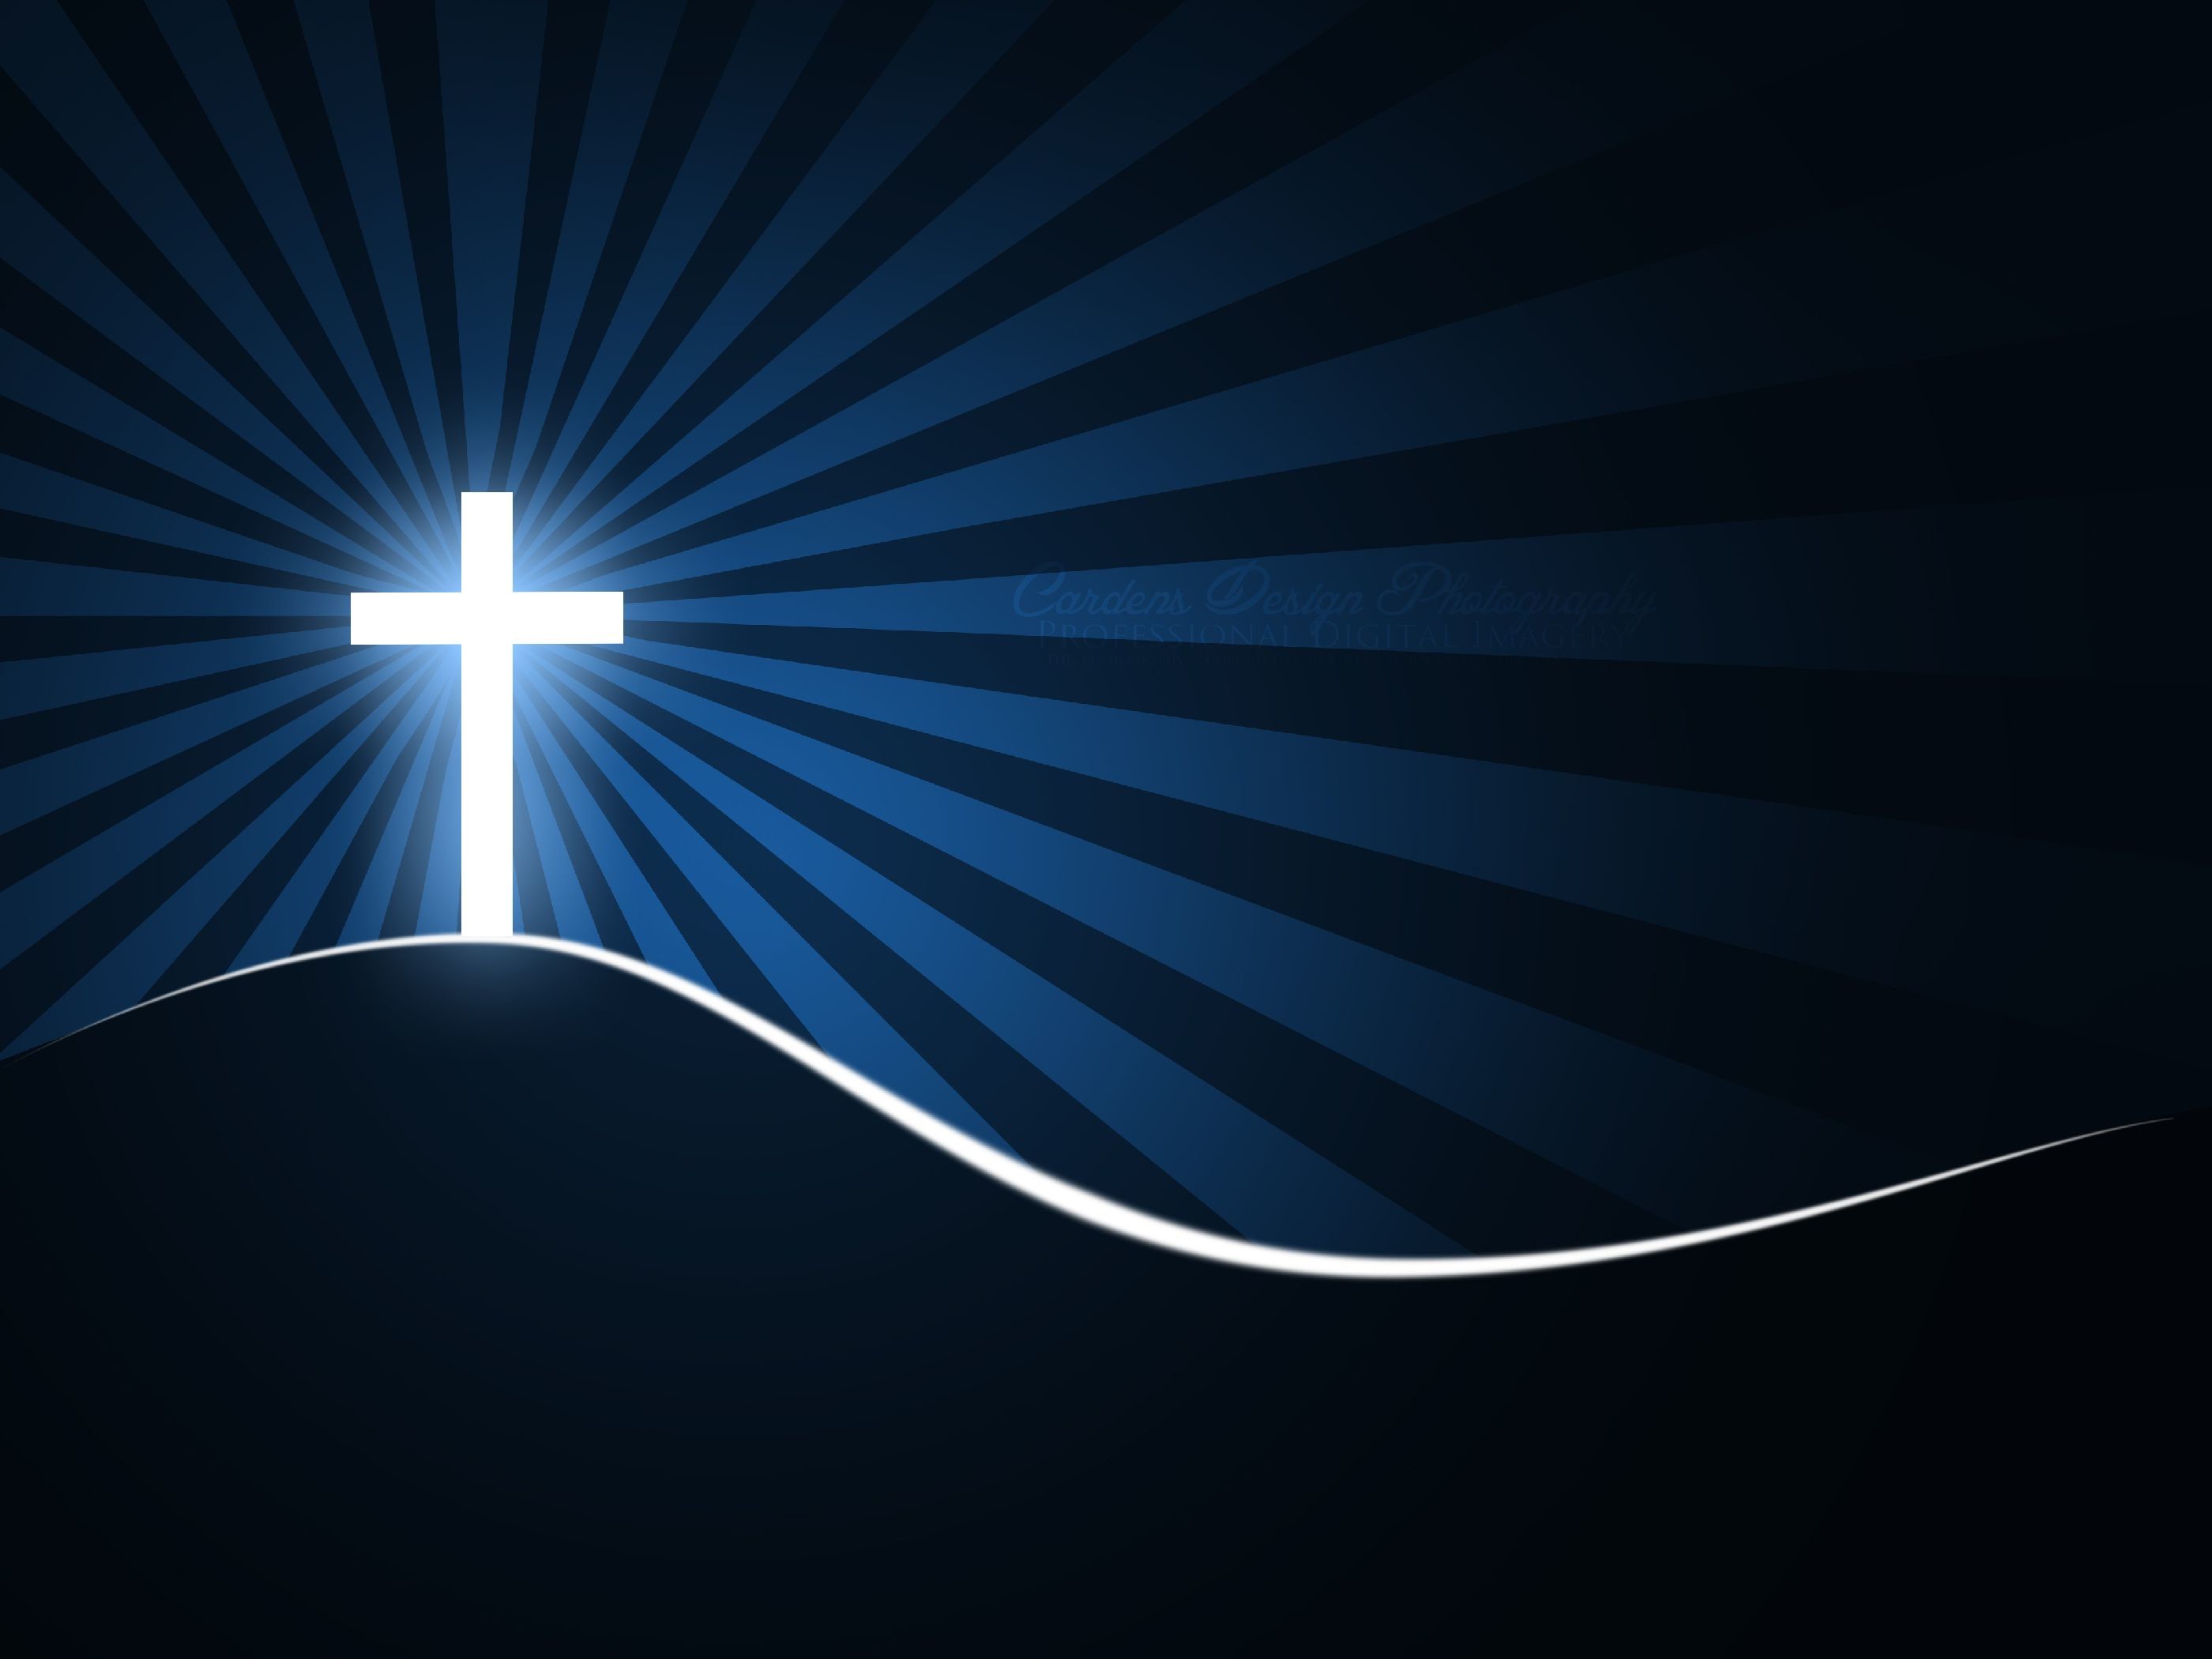 2800x2100 christian pictures | image code religion 0026 tags christian background  christian wallpaper .